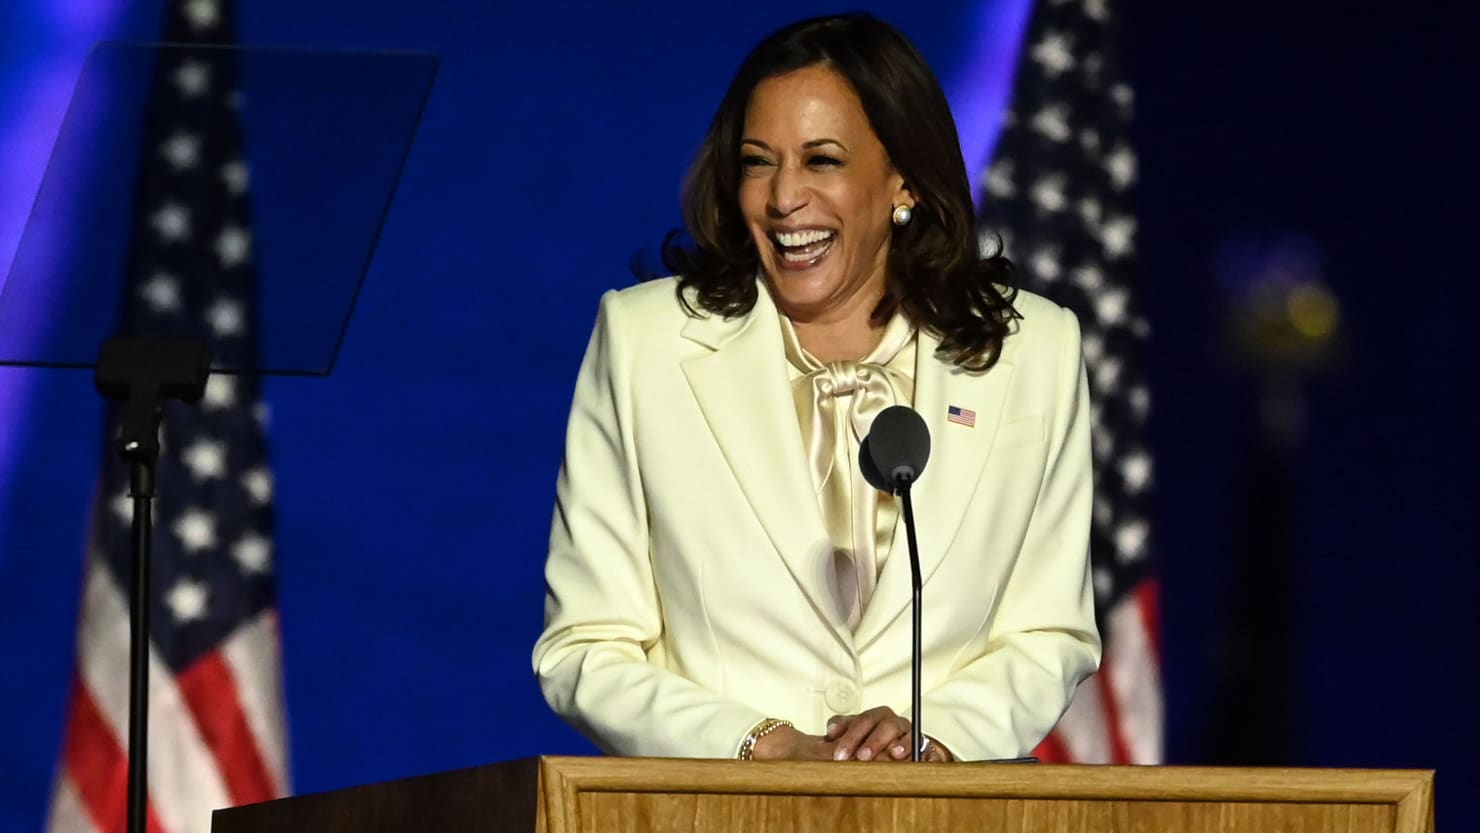 Kamala Harris, First Woman Elected Vice President, Addresses the Nation ...